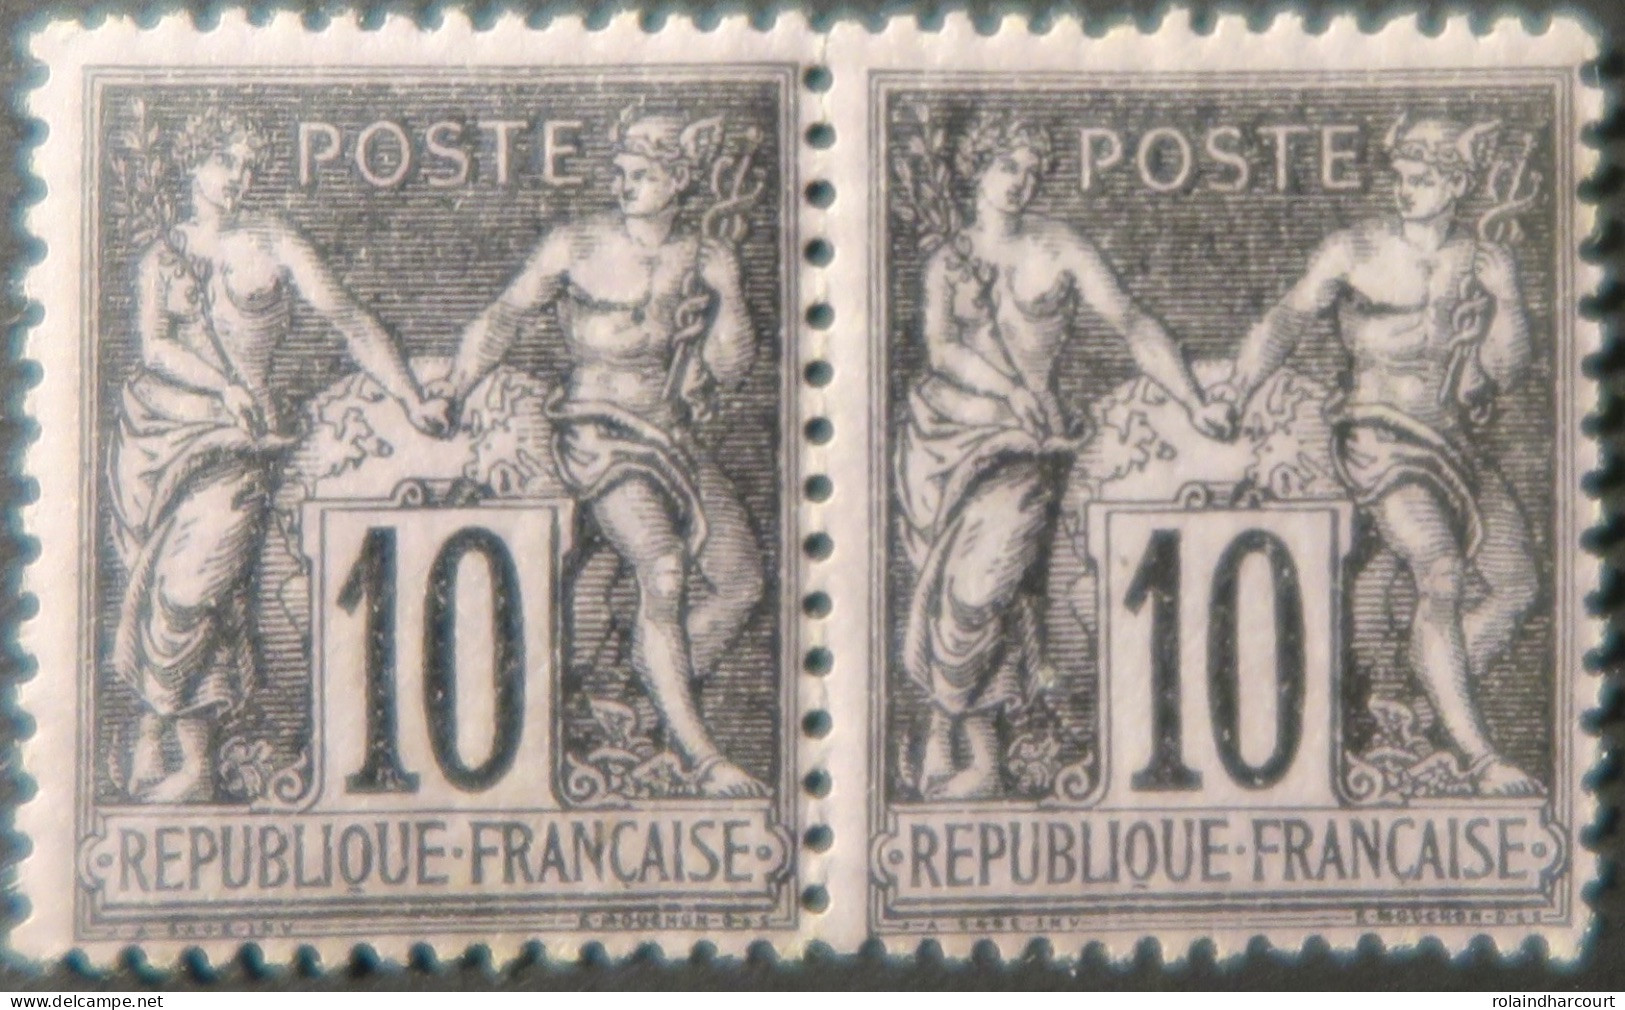 R1311/2978 - FRANCE - SAGE TYPE I N°103 NEUFS** (PAIRE) - 1876-1878 Sage (Type I)